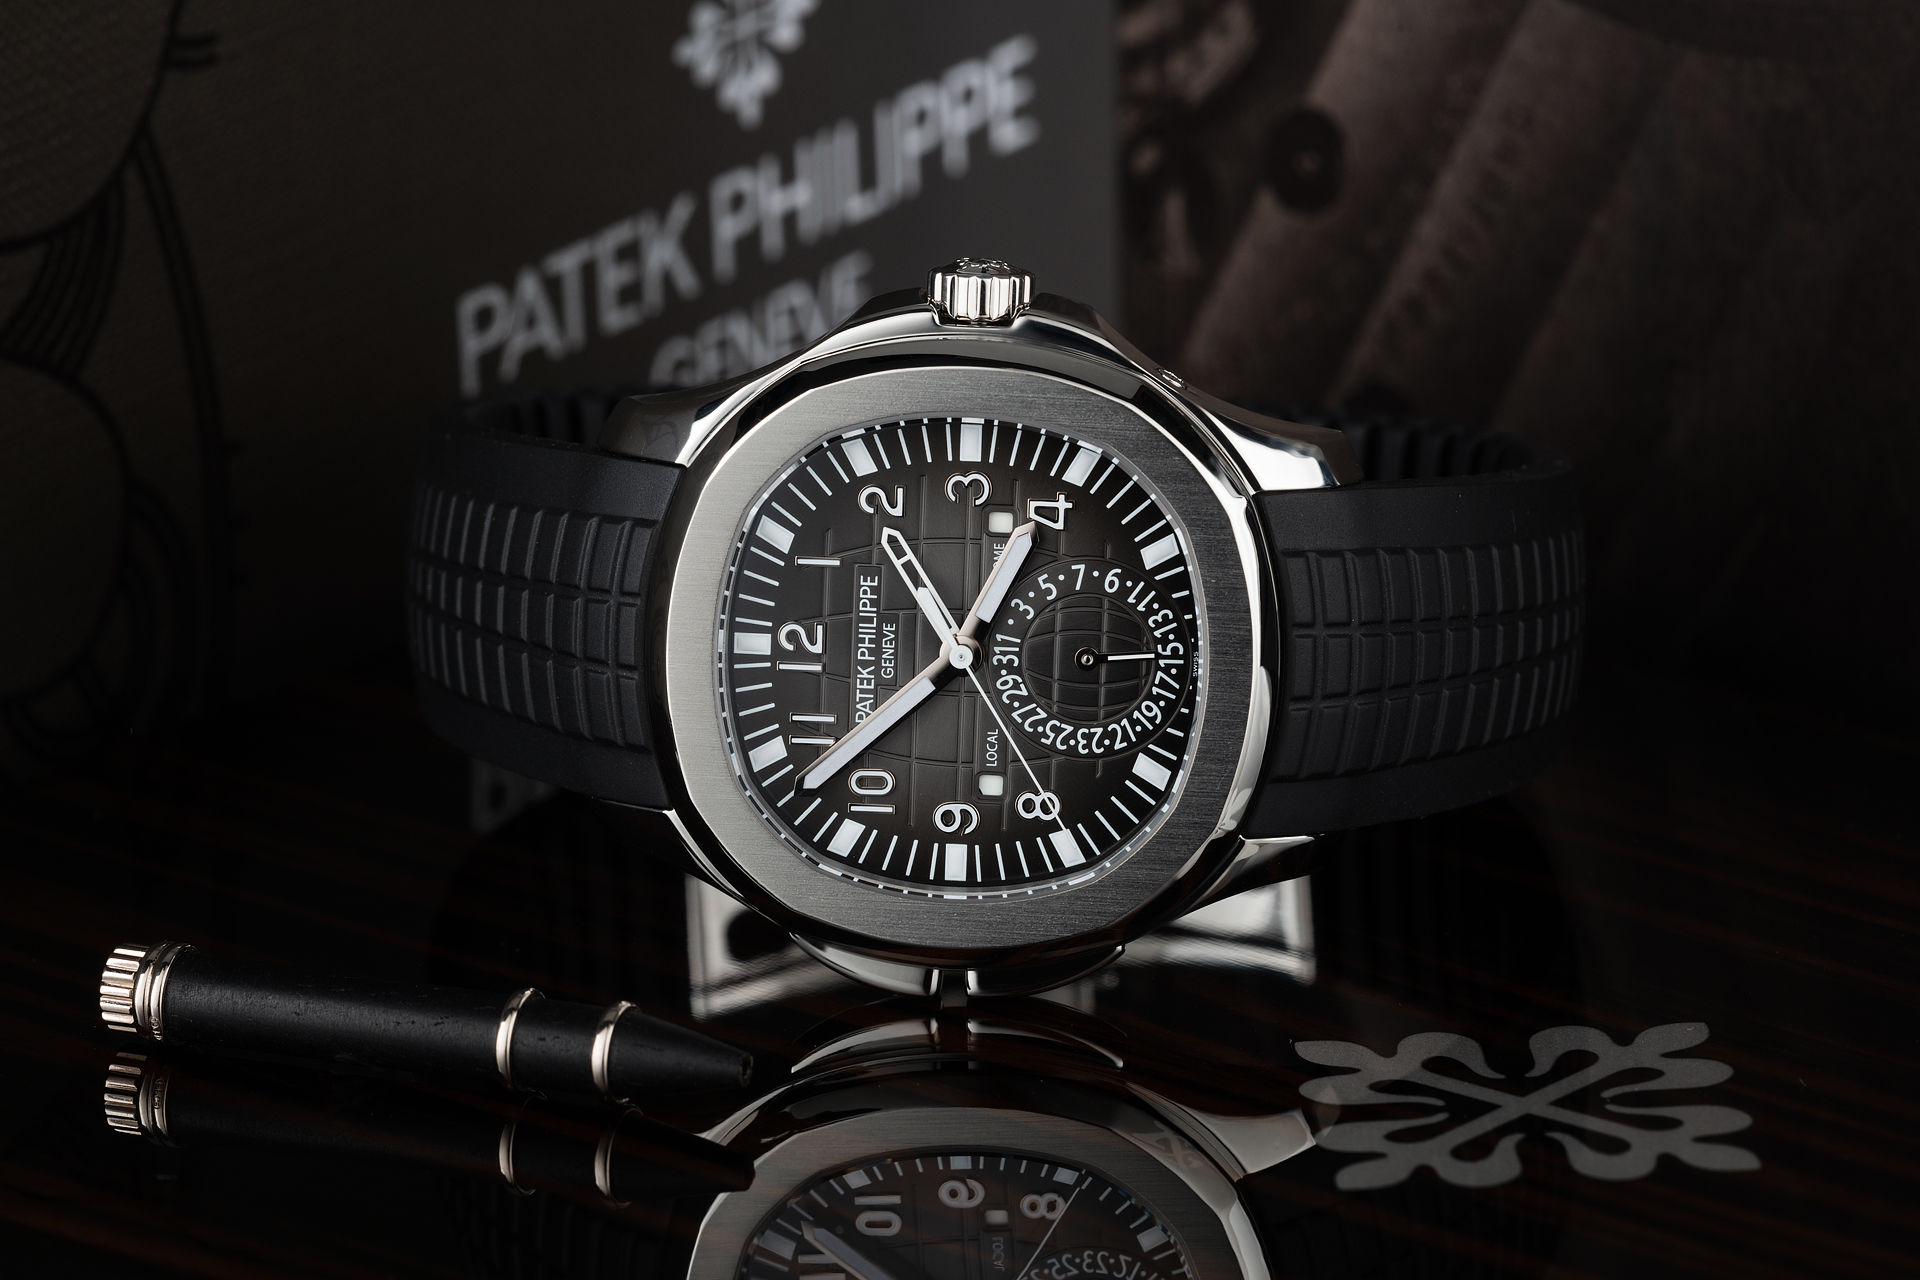 Patek Philippe Aquanaut Travel Time Watches ref 5164A